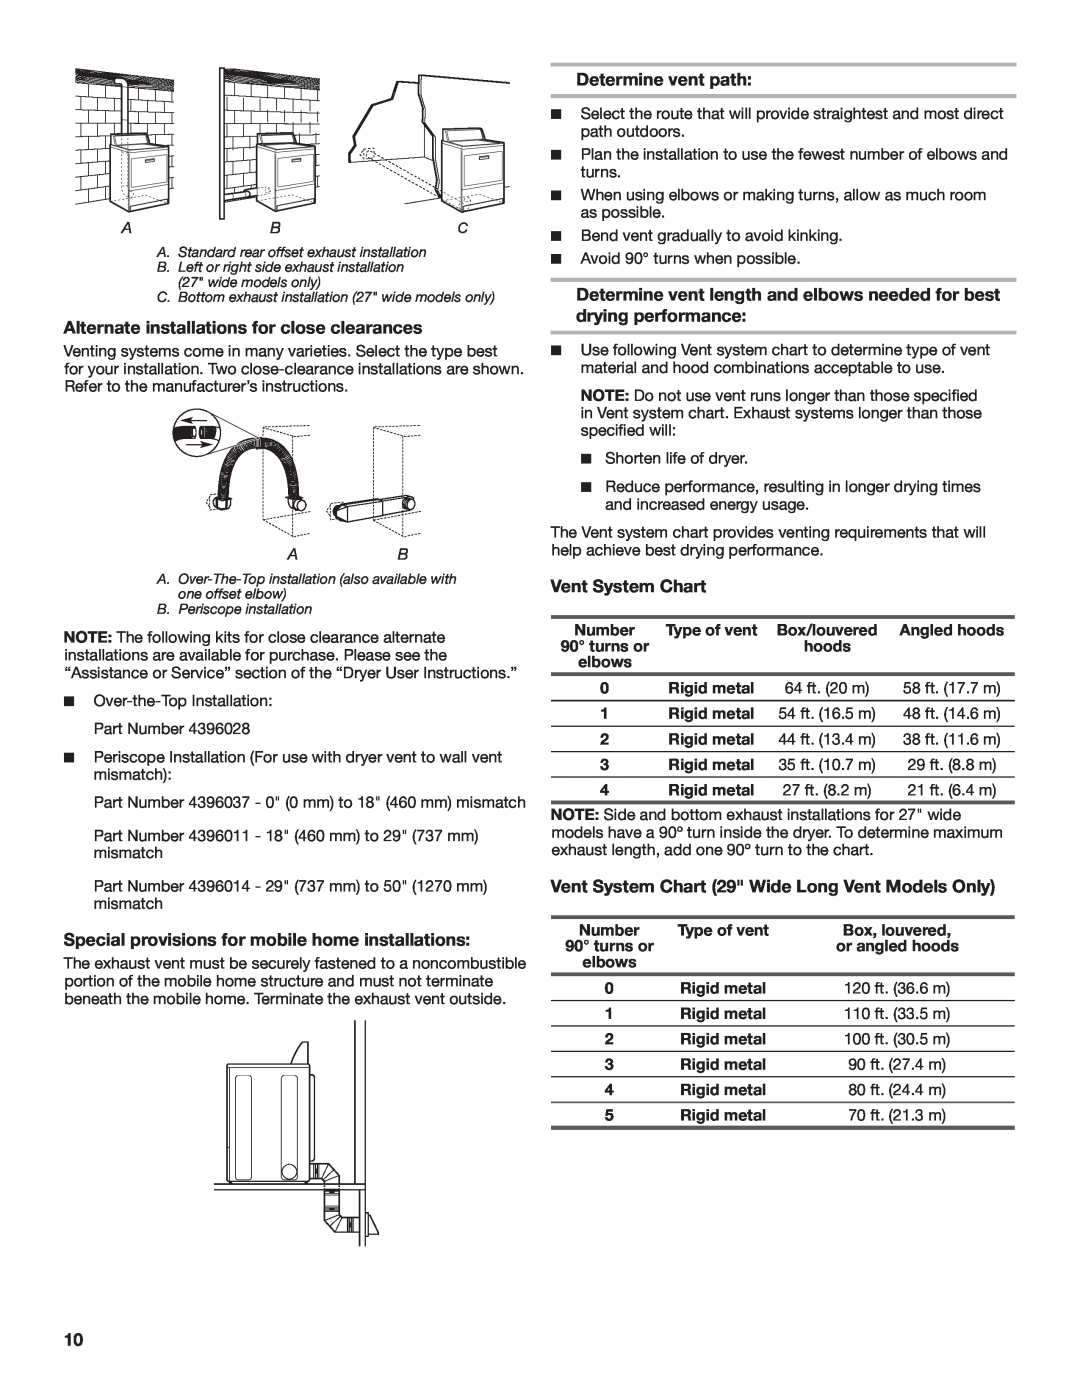 Maytag W10296135A Alternate installations for close clearances, Special provisions for mobile home installations 